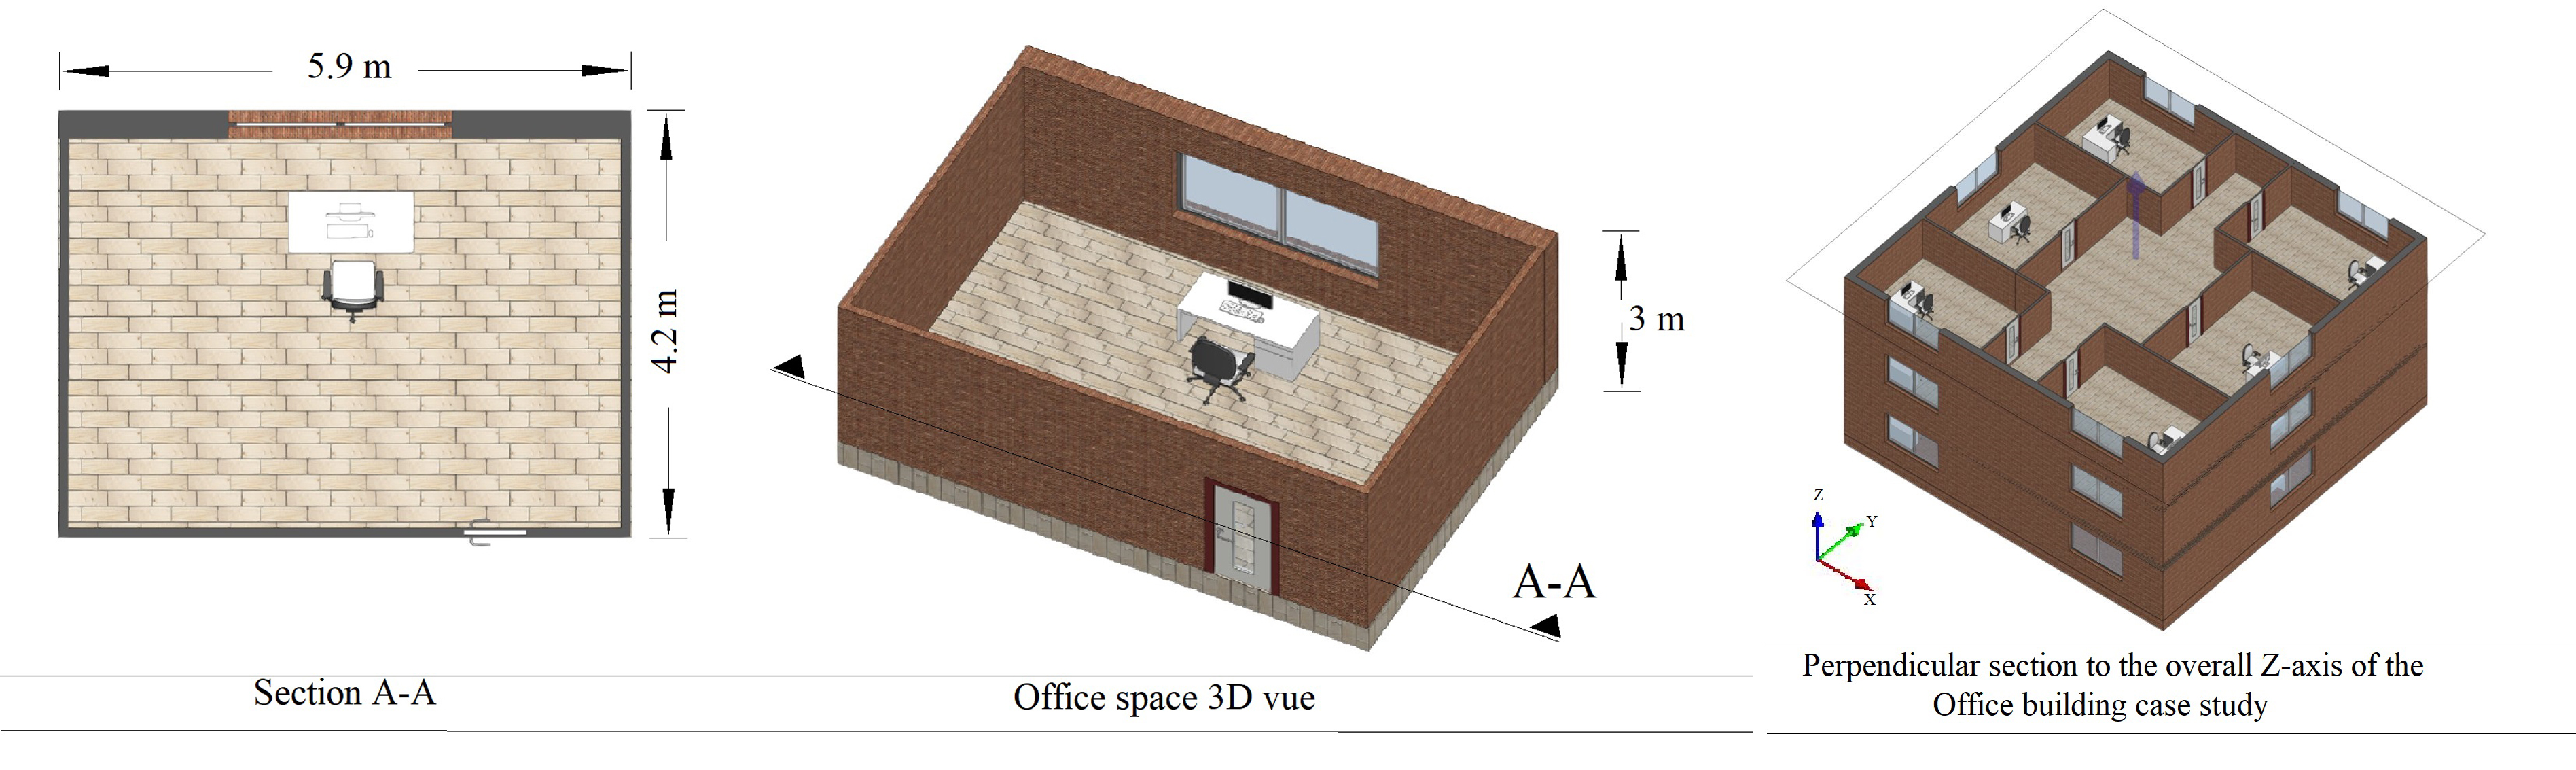 Characteristics of the office building (case study).